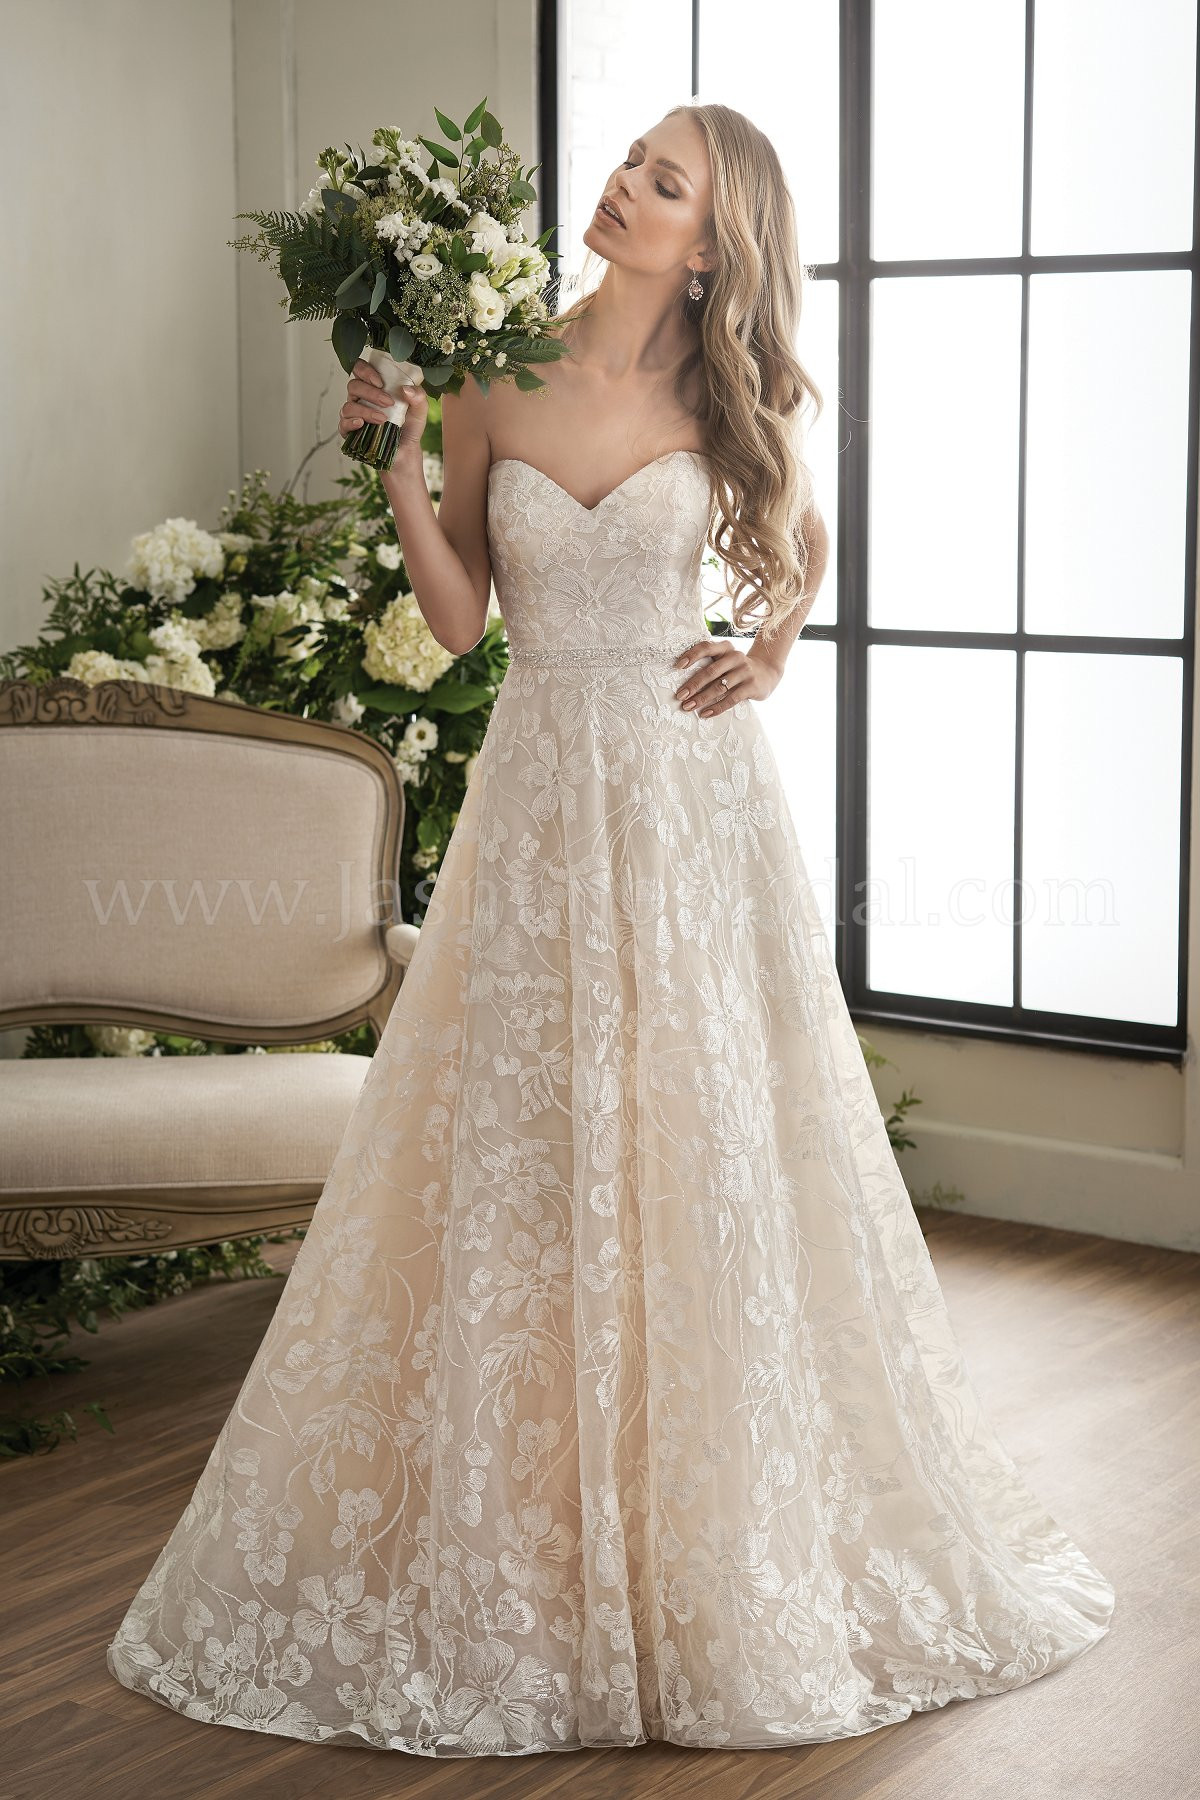 Embroidered Wedding Dress
 T Sweetheart Strapless Embroidered Lace Ball Gown